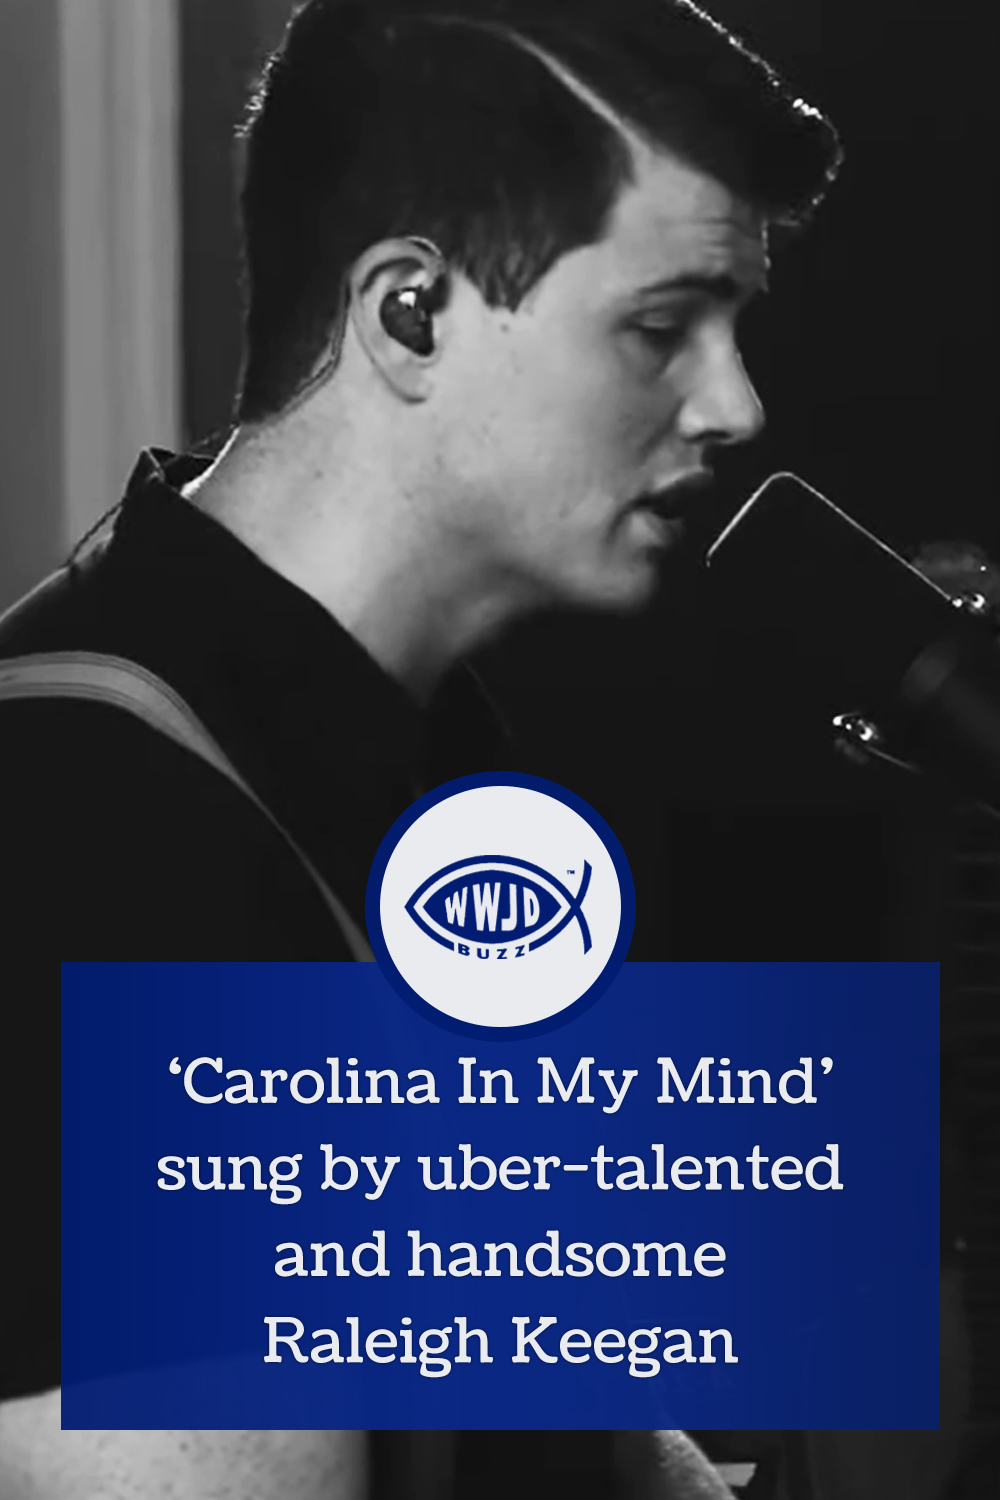 ‘Carolina In My Mind’ sung by uber-talented and handsome Raleigh Keegan